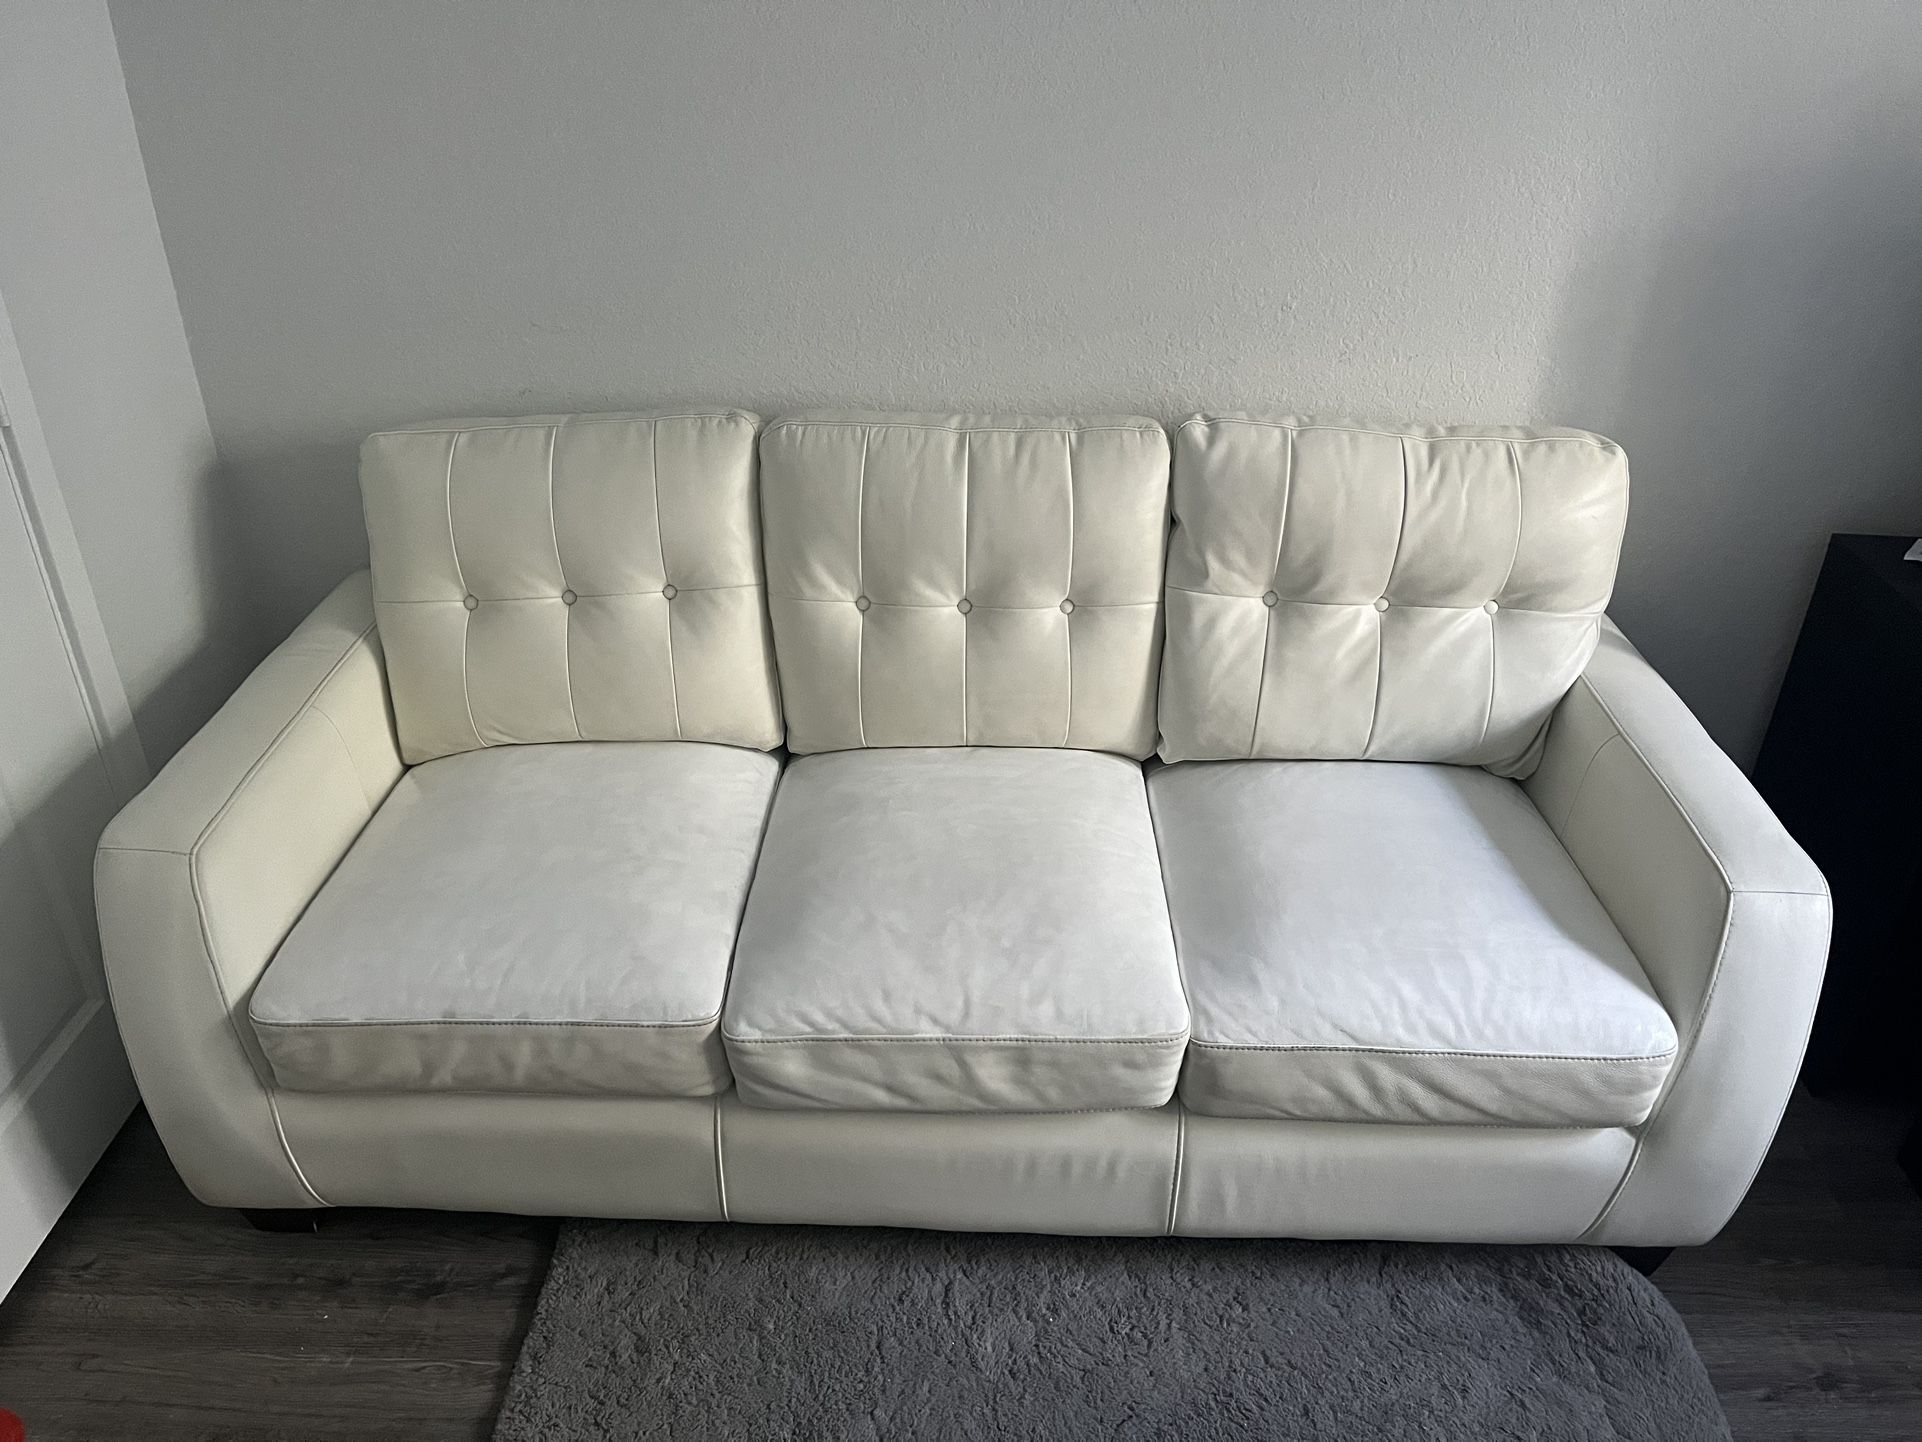 Contemporary Cube Style White Faux Leather Sofa.